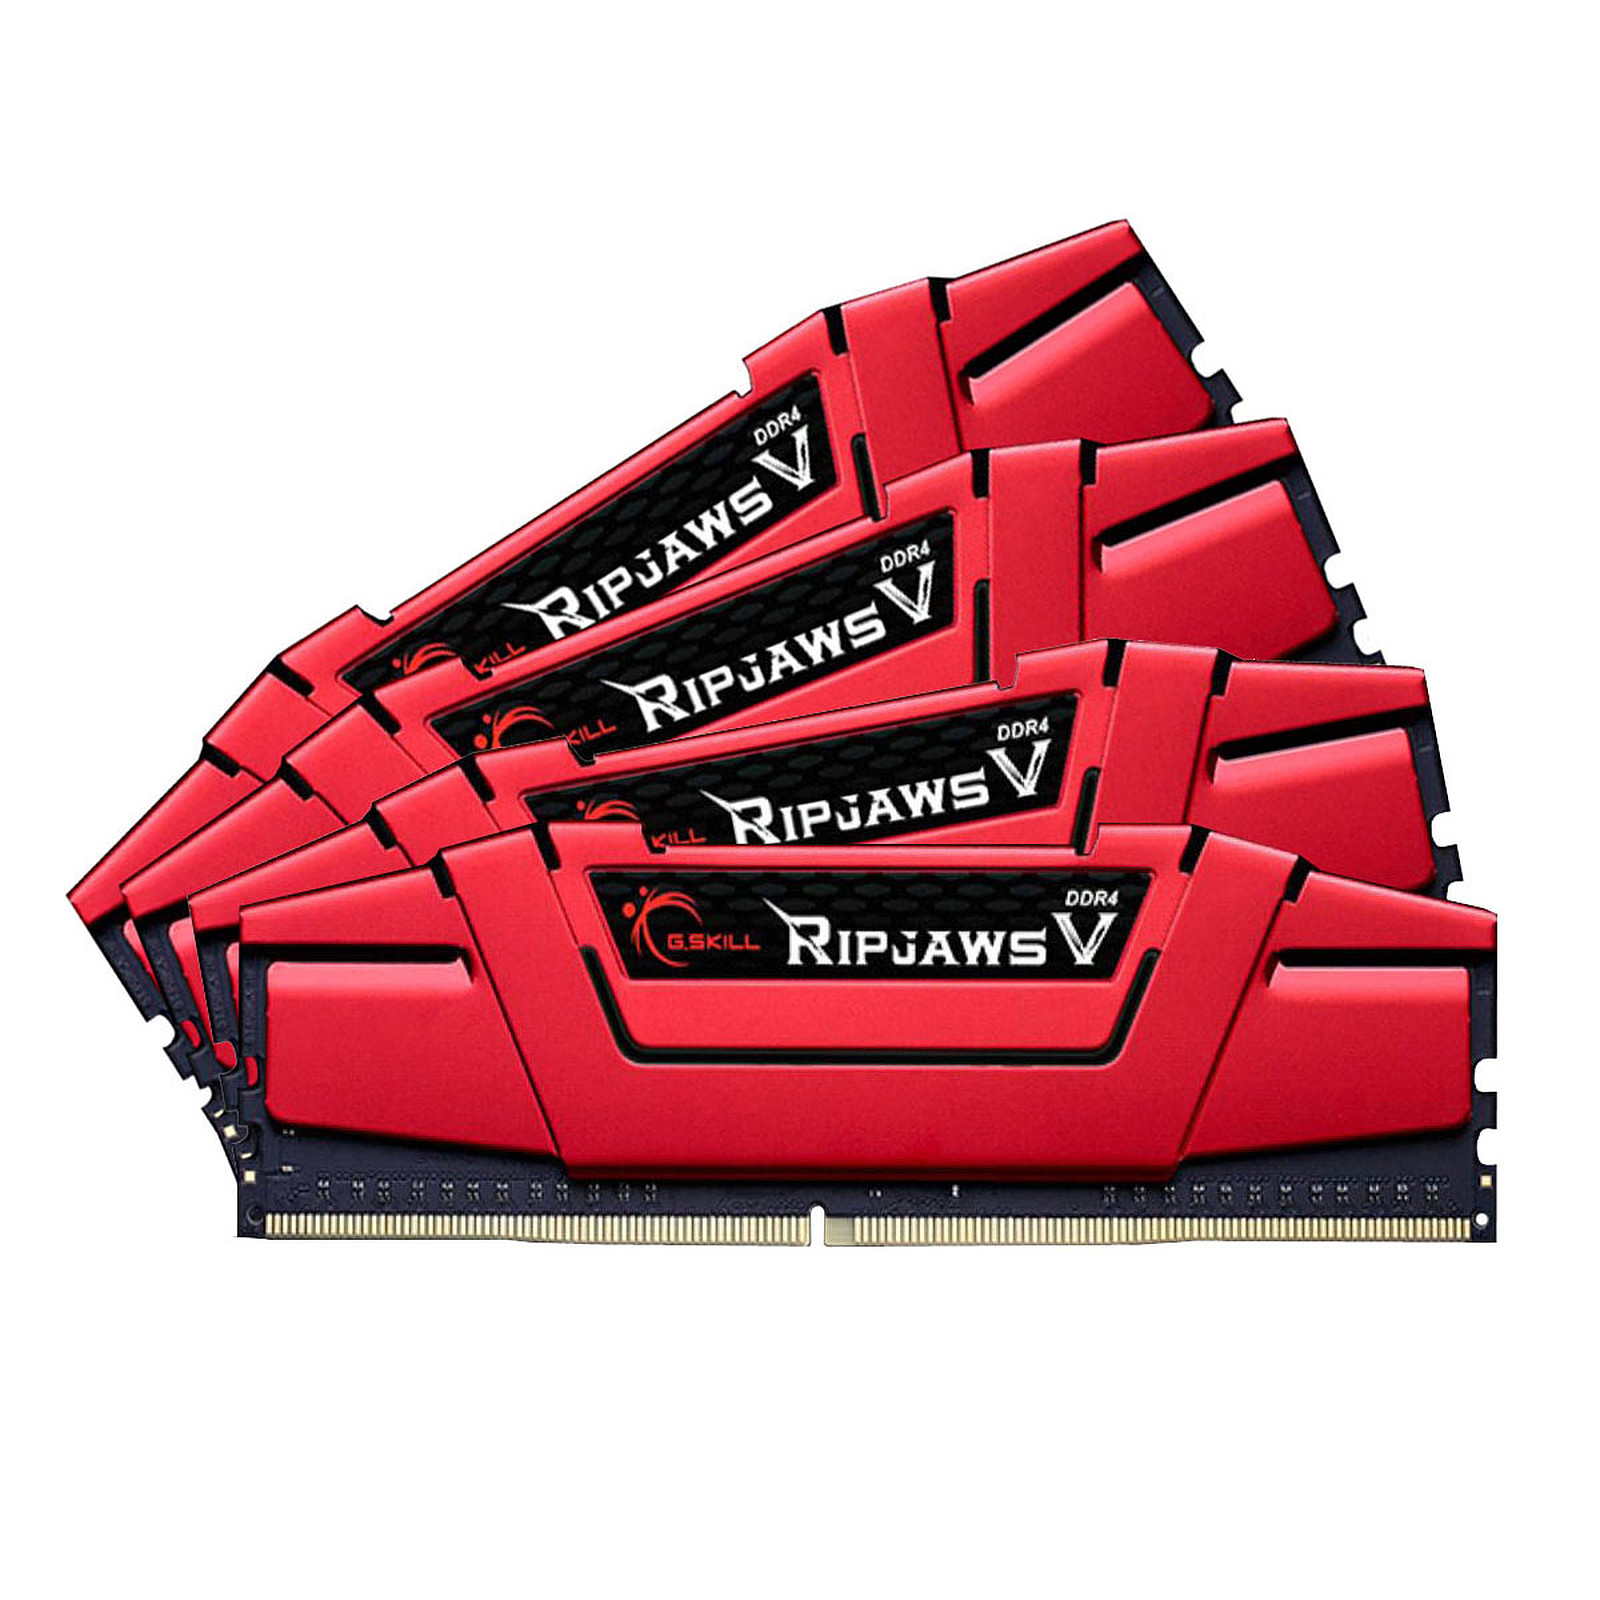 G.Skill RipJaws 5 Series Rouge 32 Go (4x8 Go) DDR4 3600 MHz CL19 - Memoire PC G.Skill